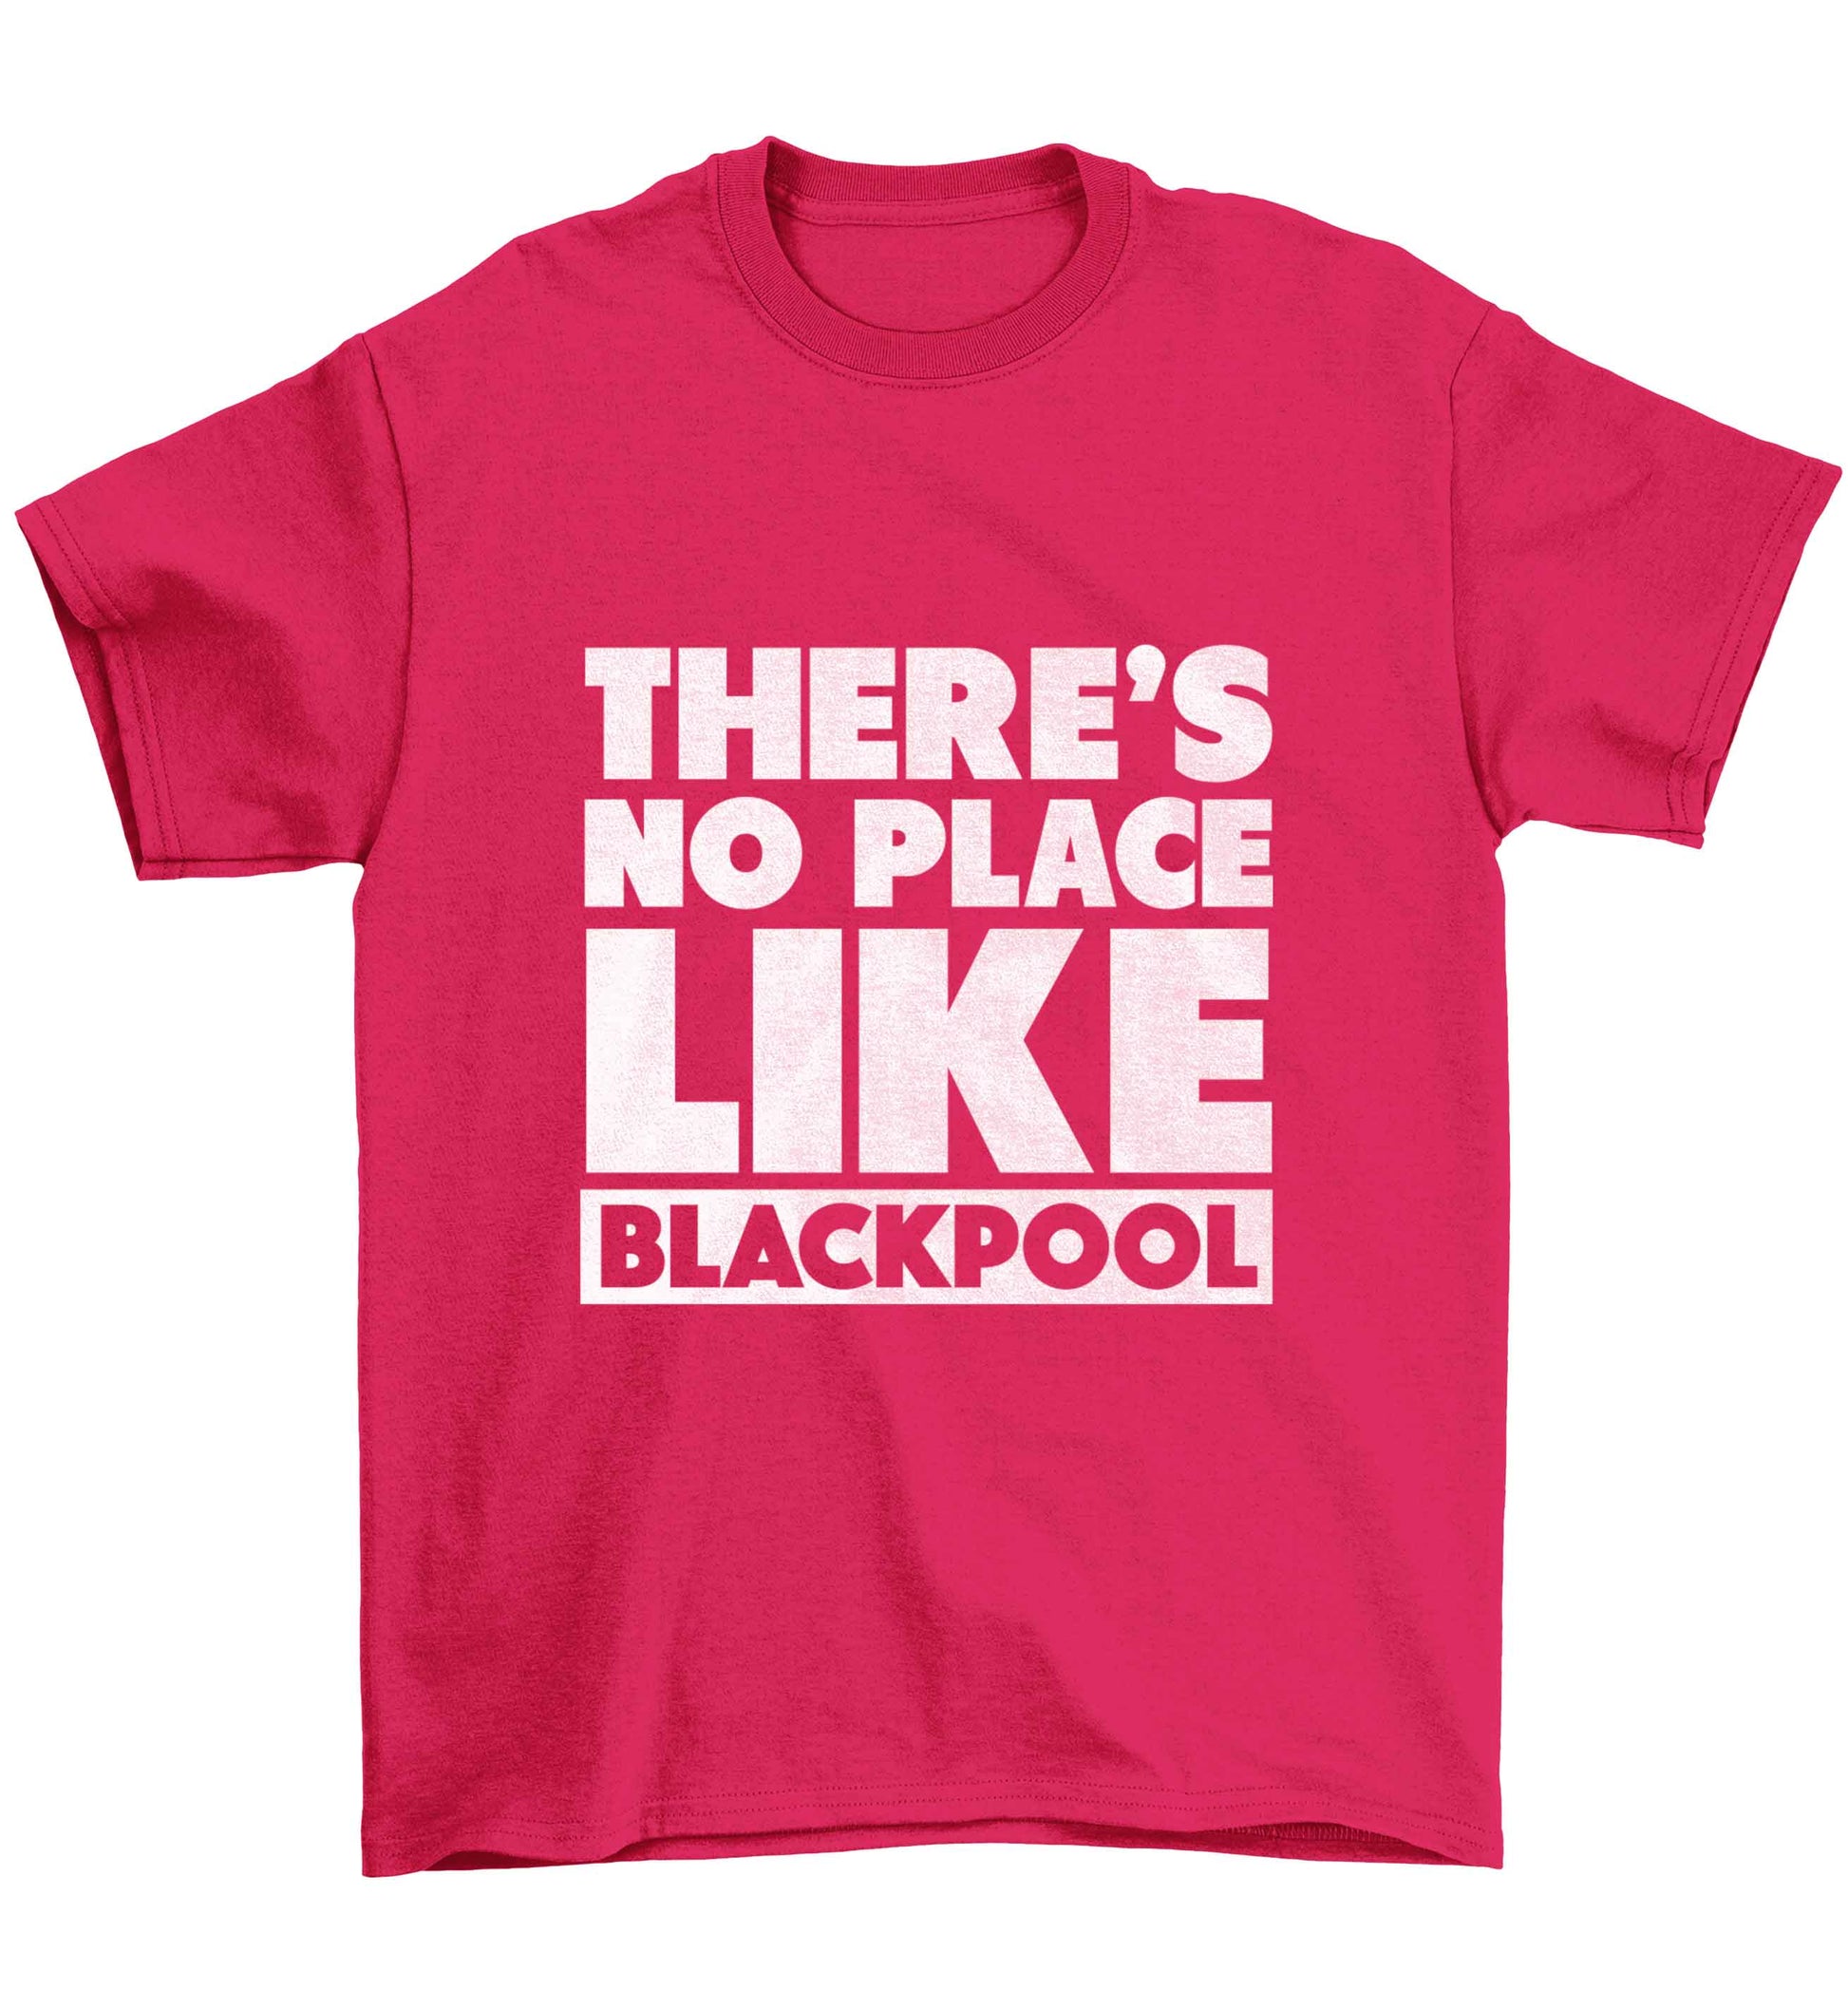 There's no place like Blackpool Children's pink Tshirt 12-13 Years